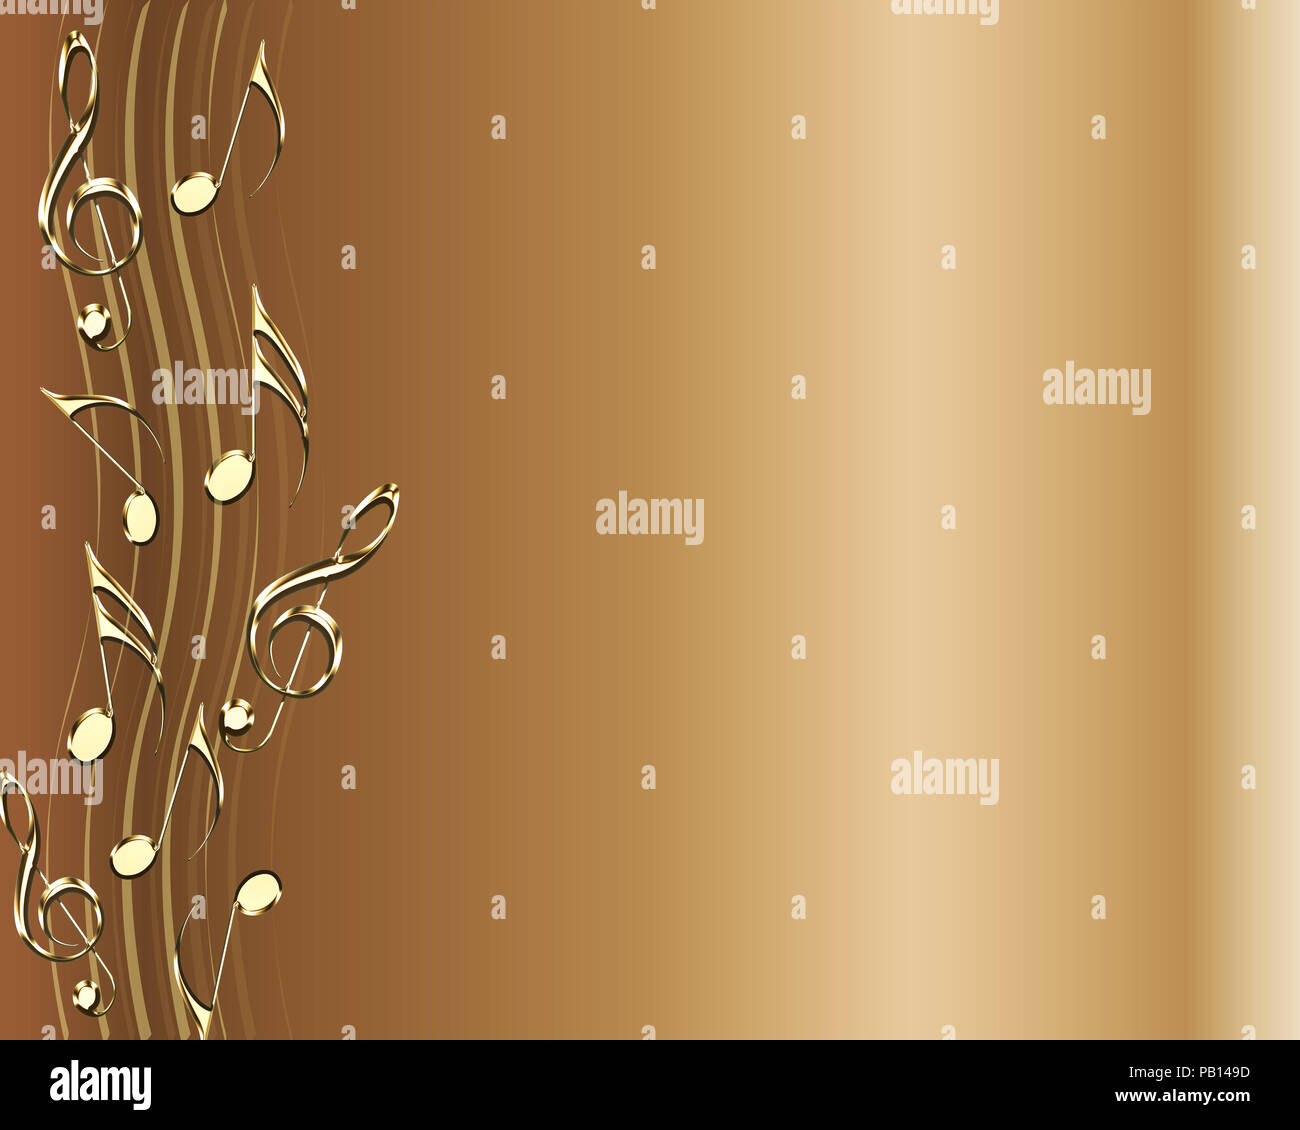 brown background theme with musical notes and treble clef illustration  Stock Photo - Alamy